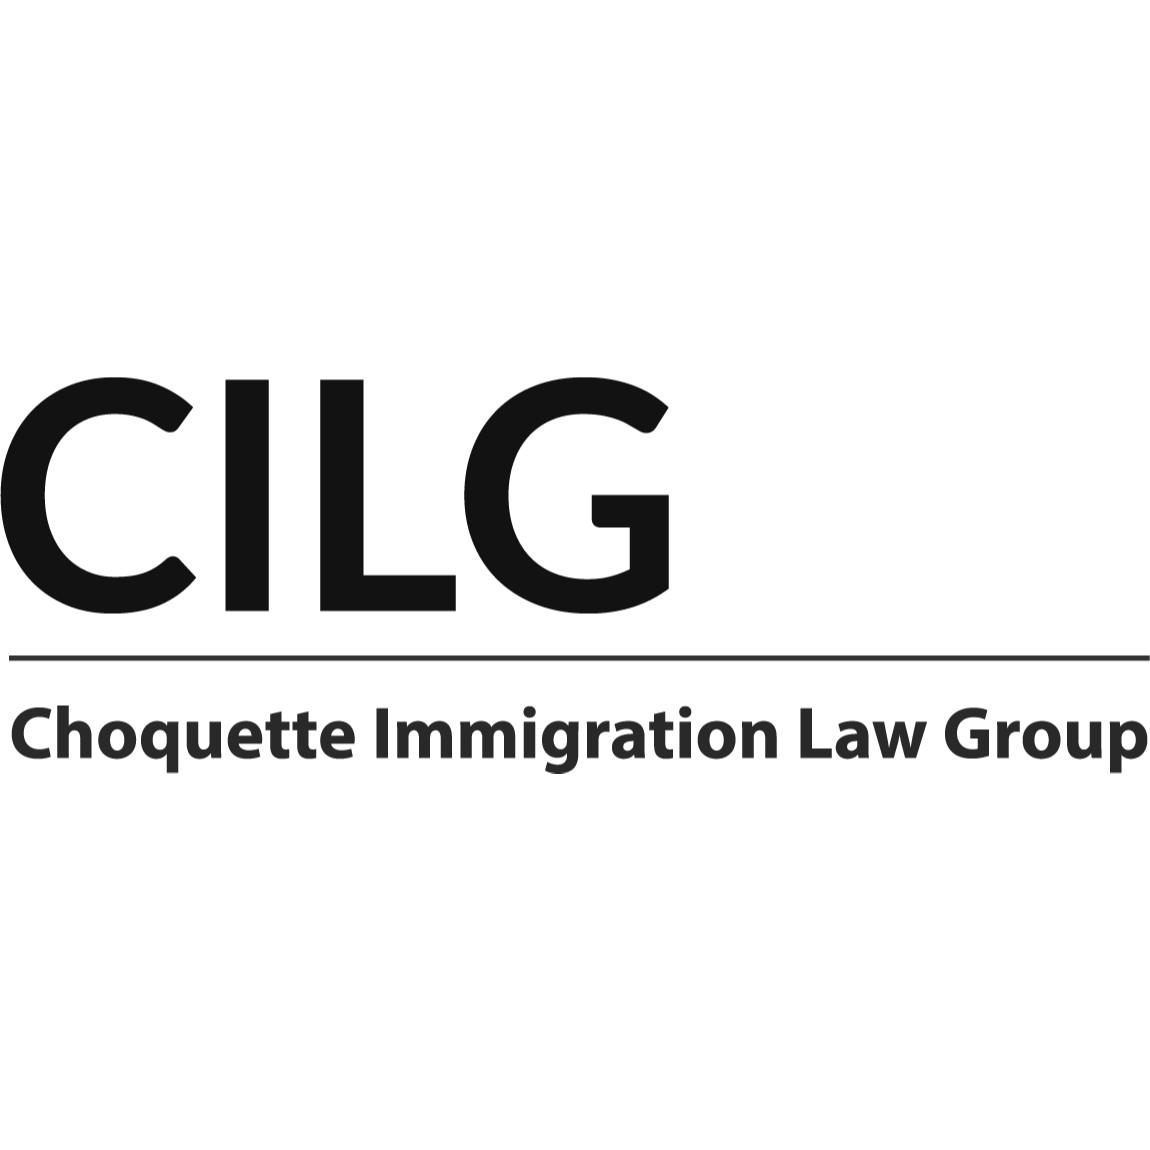 Choquette Immigration Law Group - Seattle, WA 98122 - (206)269-1200 | ShowMeLocal.com